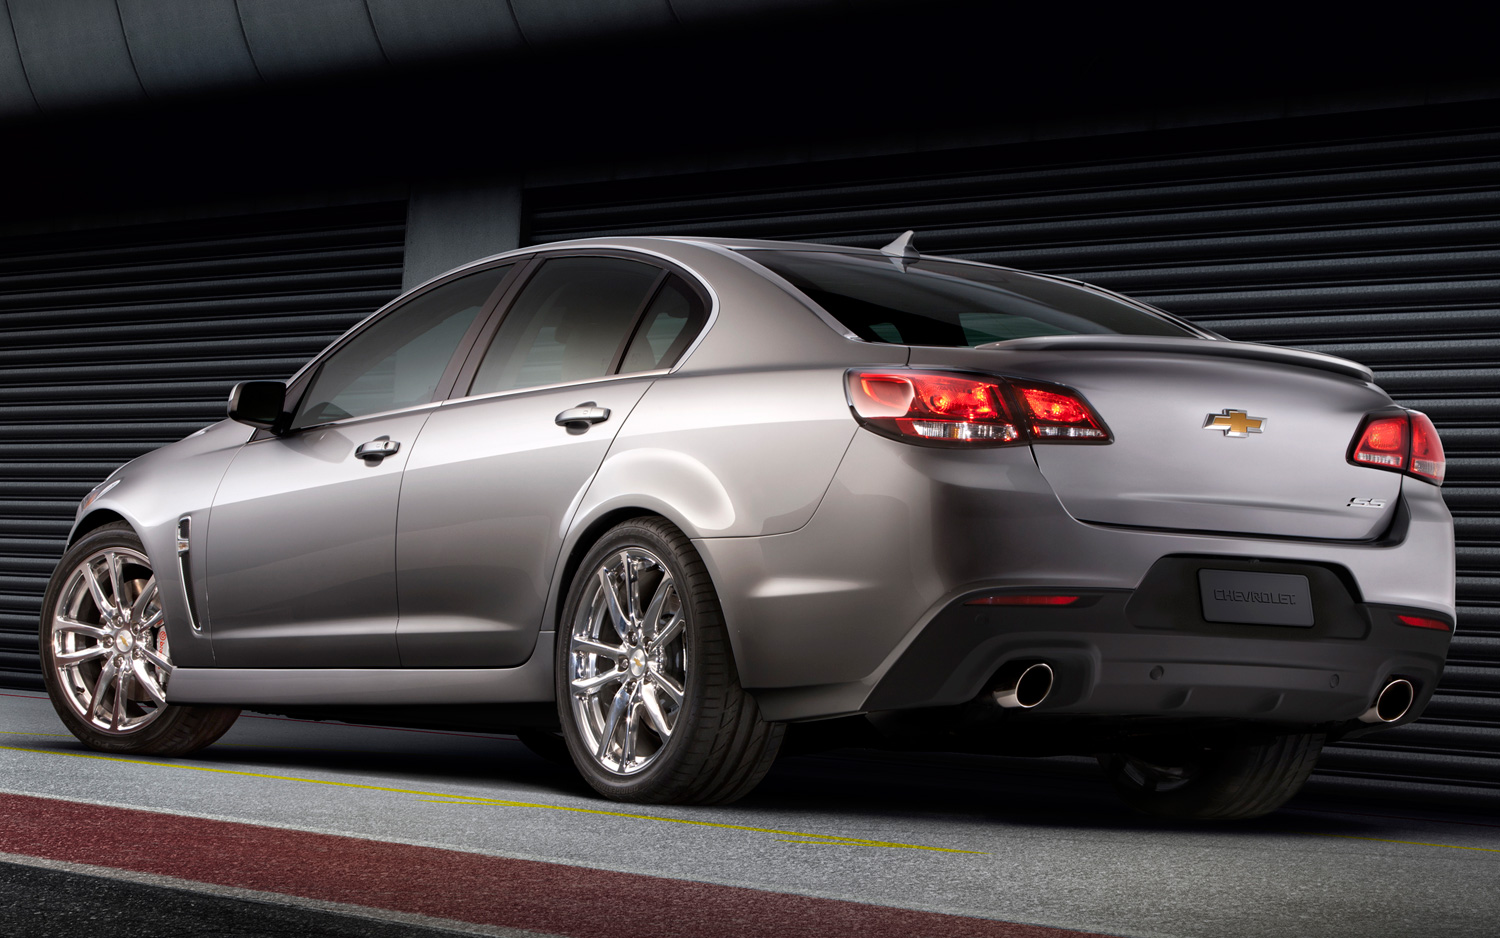  Chevrolet SS New cars reviews